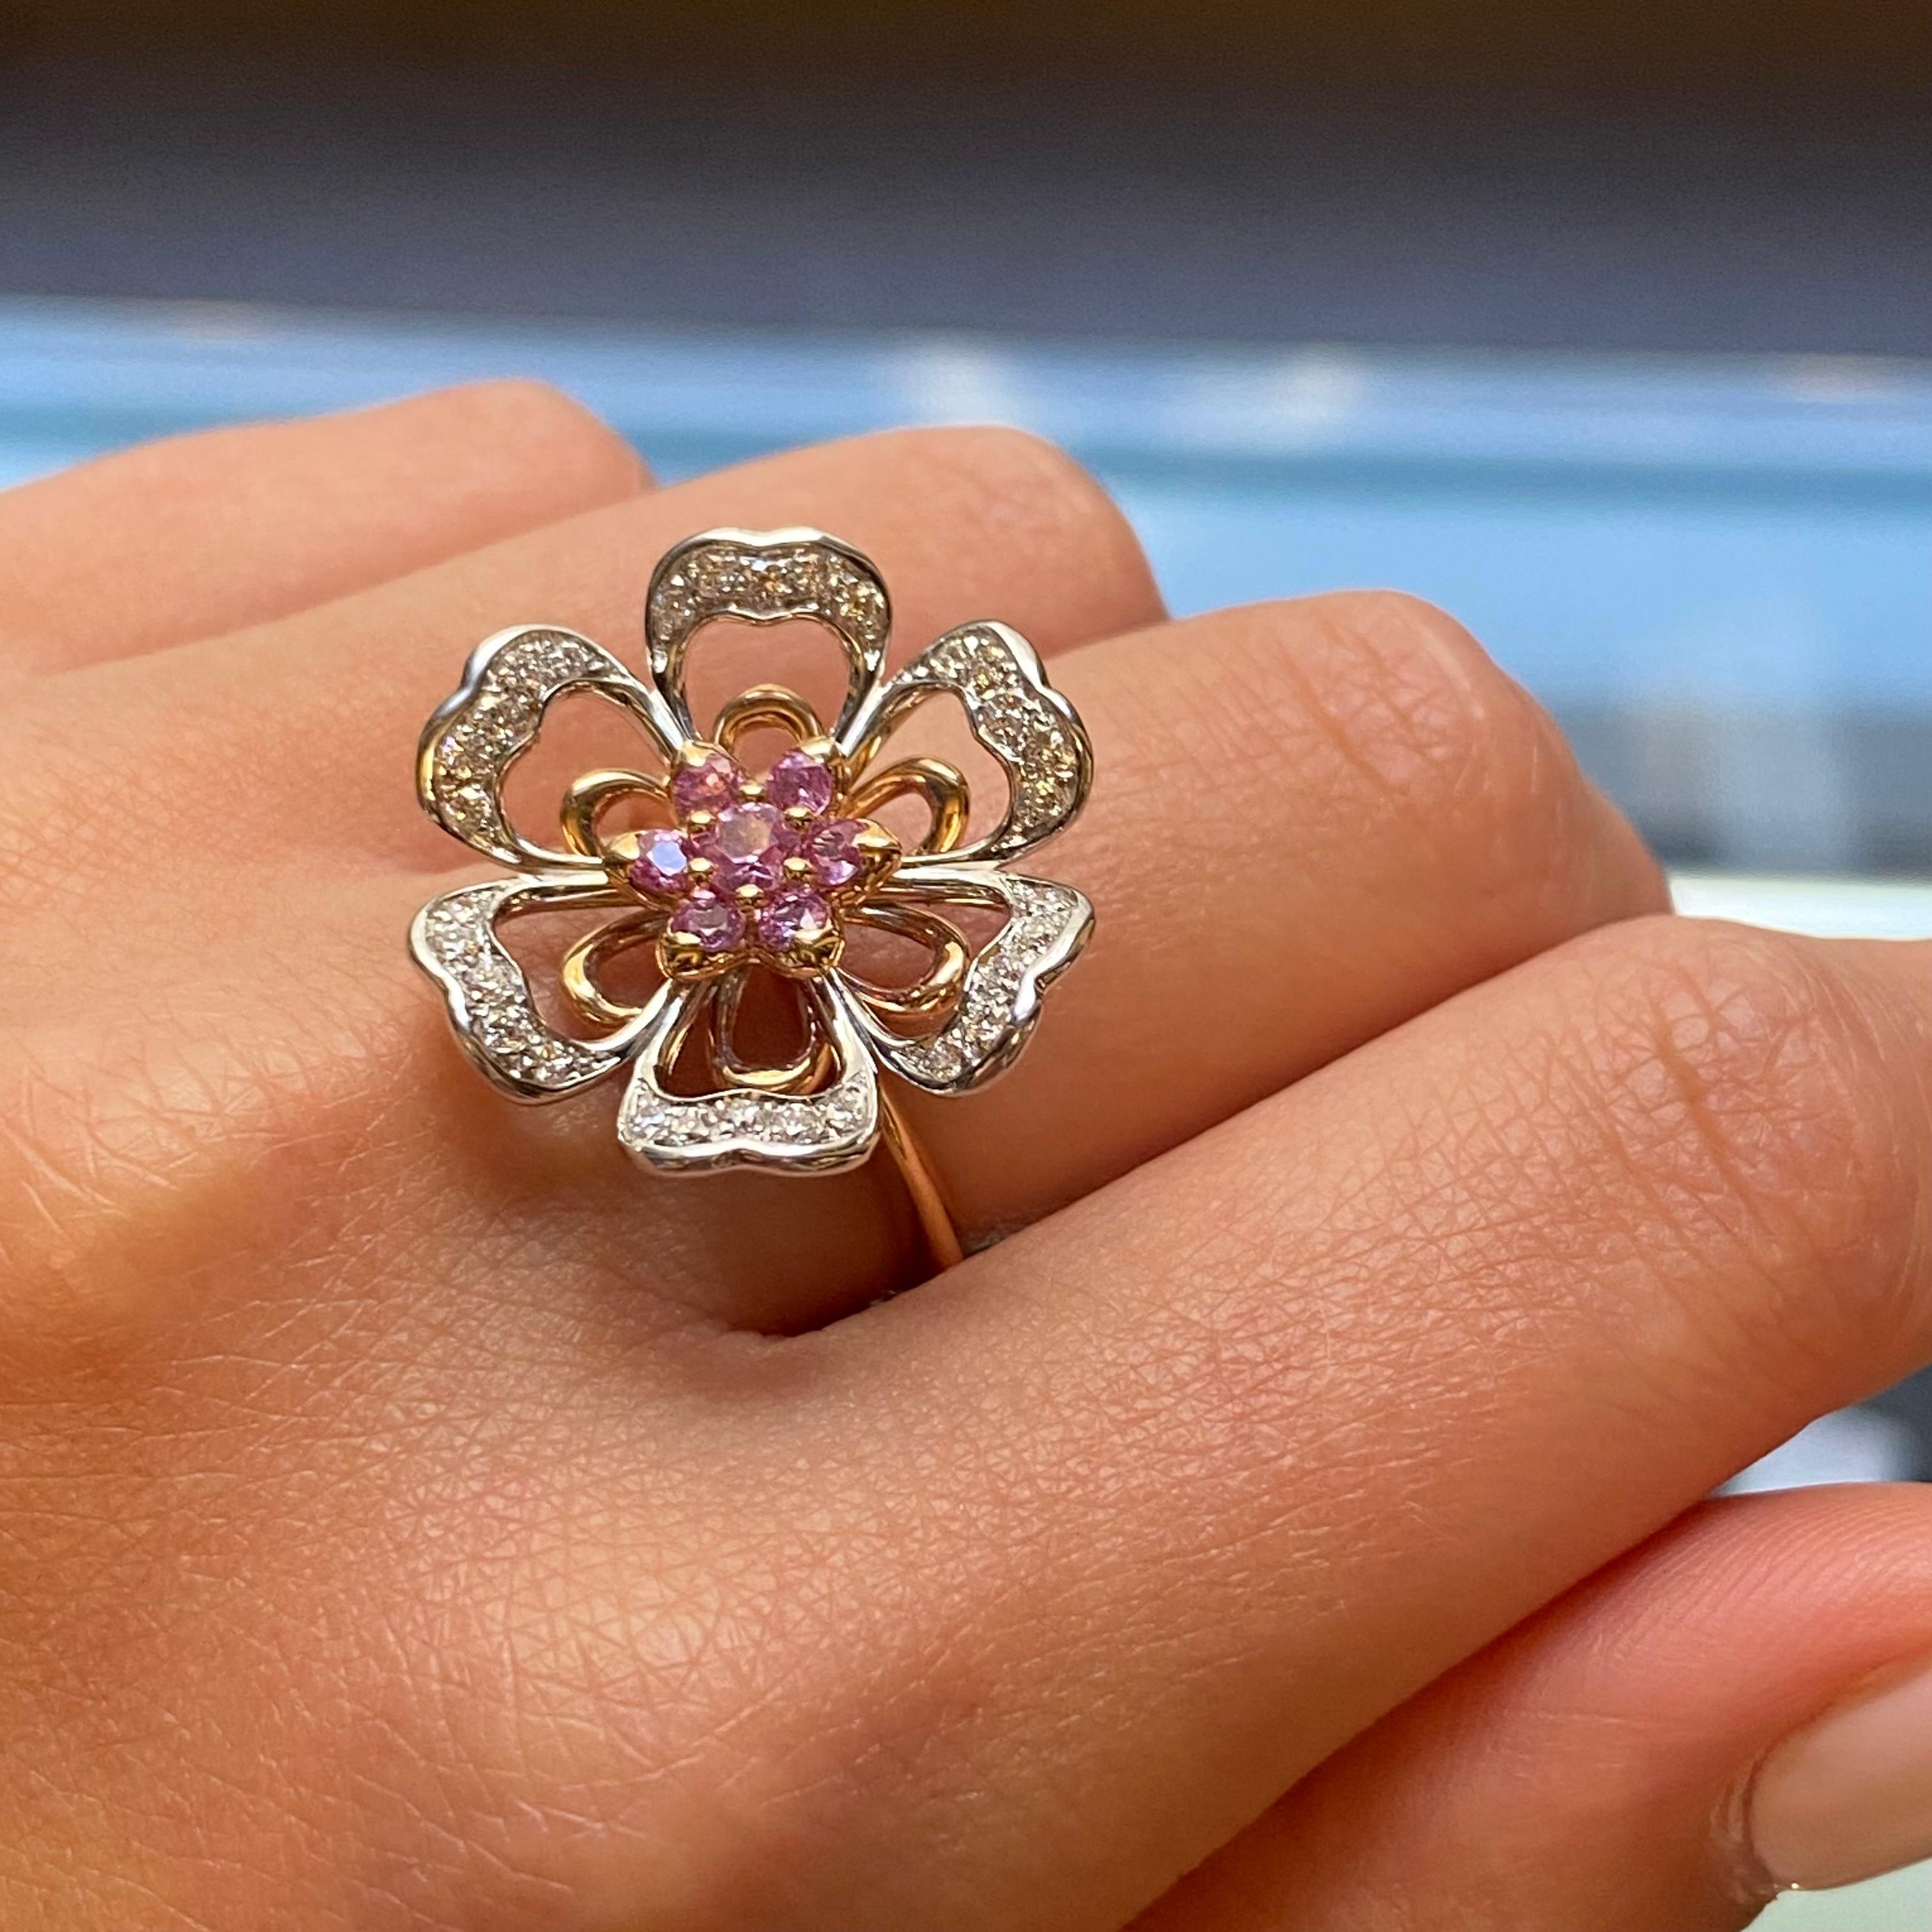 Luca Carati Diamond & Pink Sapphire Cocktail Ring 18K Gold Size 7 In New Condition For Sale In New York, NY